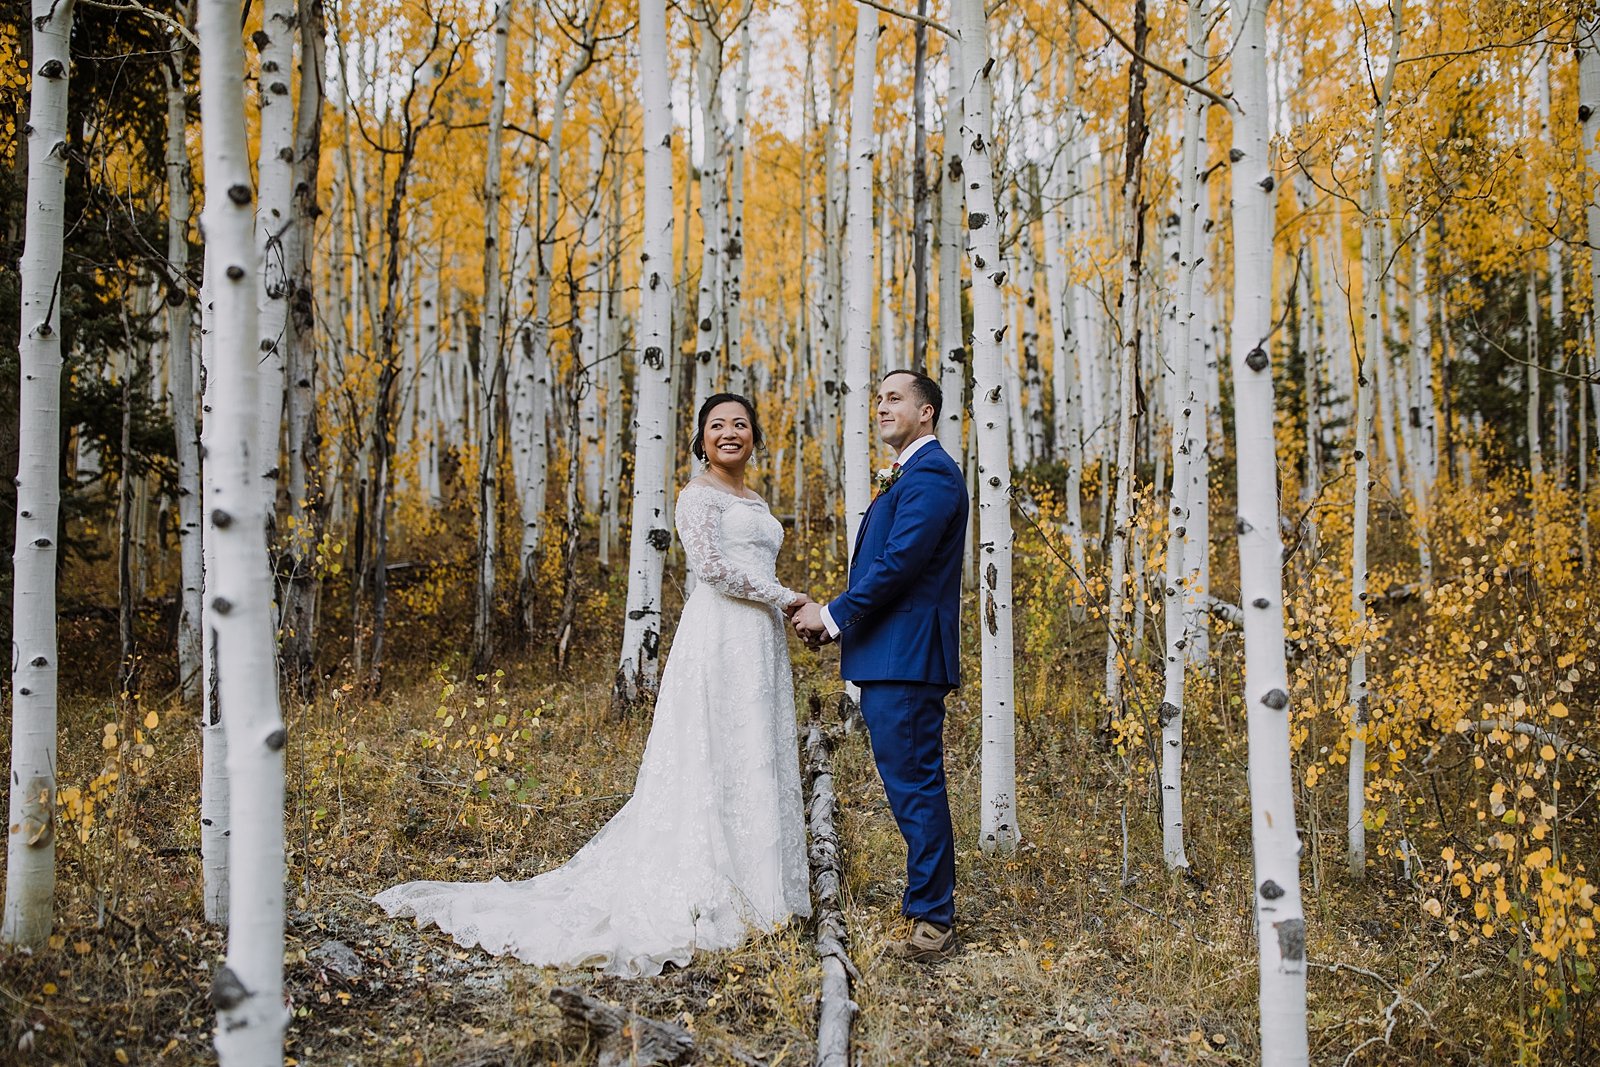 elopement ceremony in an aspen grove, ames colorado elopement, alta lakes elopement, ophir colorado elopement, telluride colorado wedding, trout lake elopement, priest lake elopement